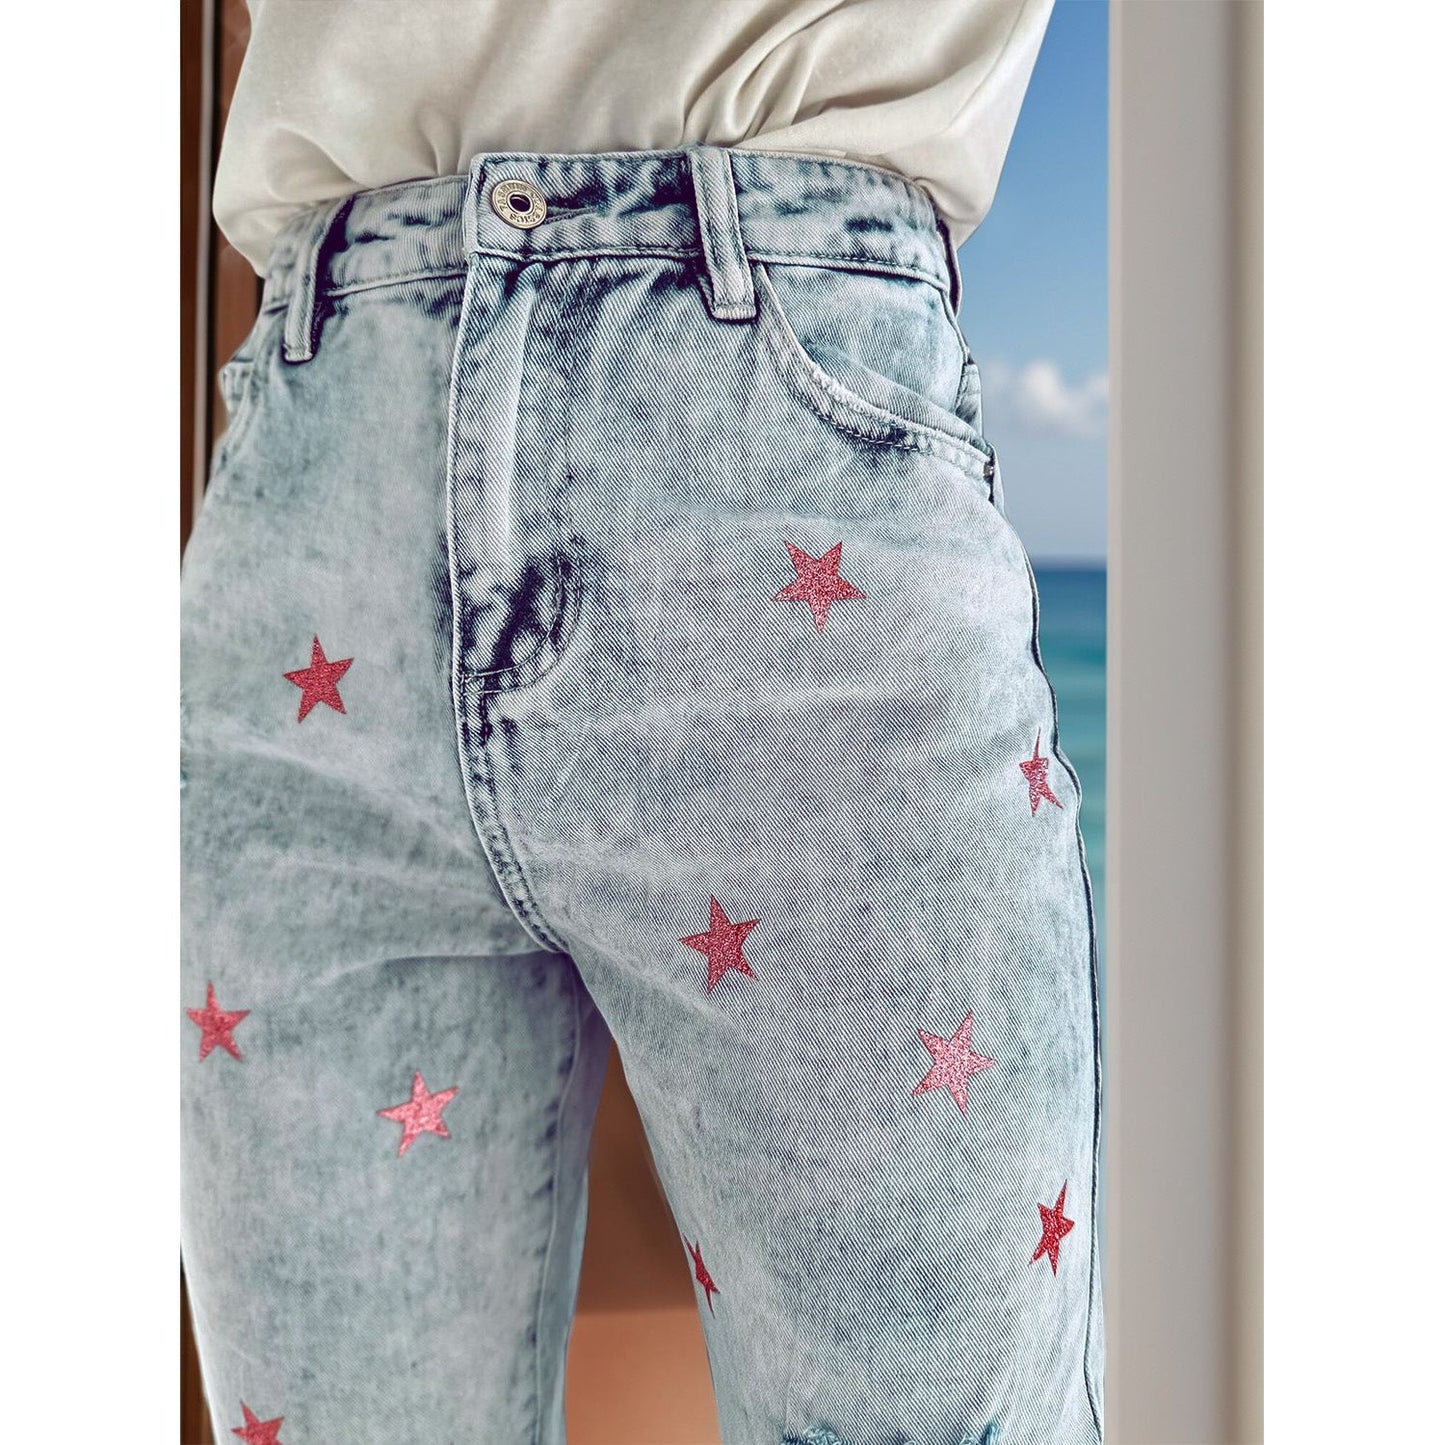 Distressed Star Jeans with Pockets